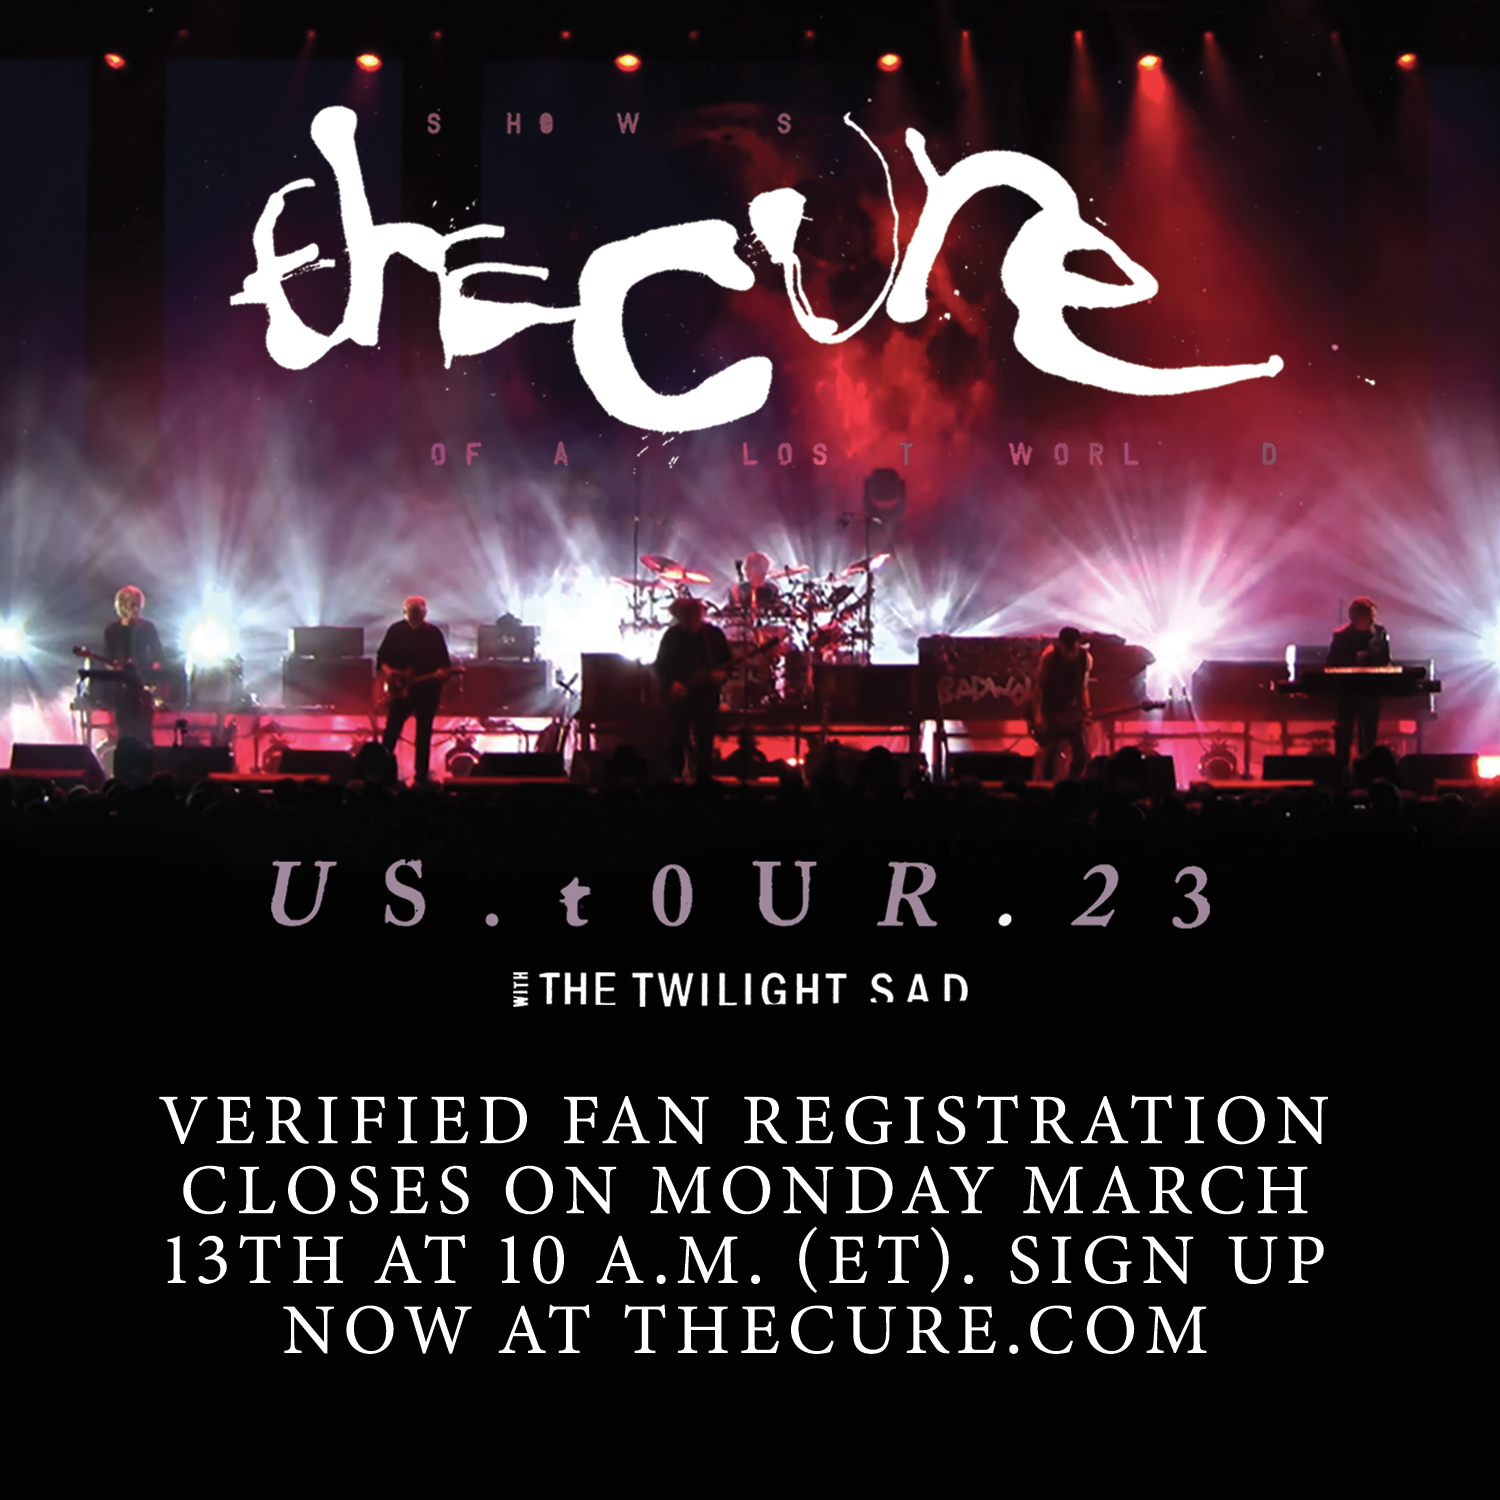 The Cure (@thecure) / X